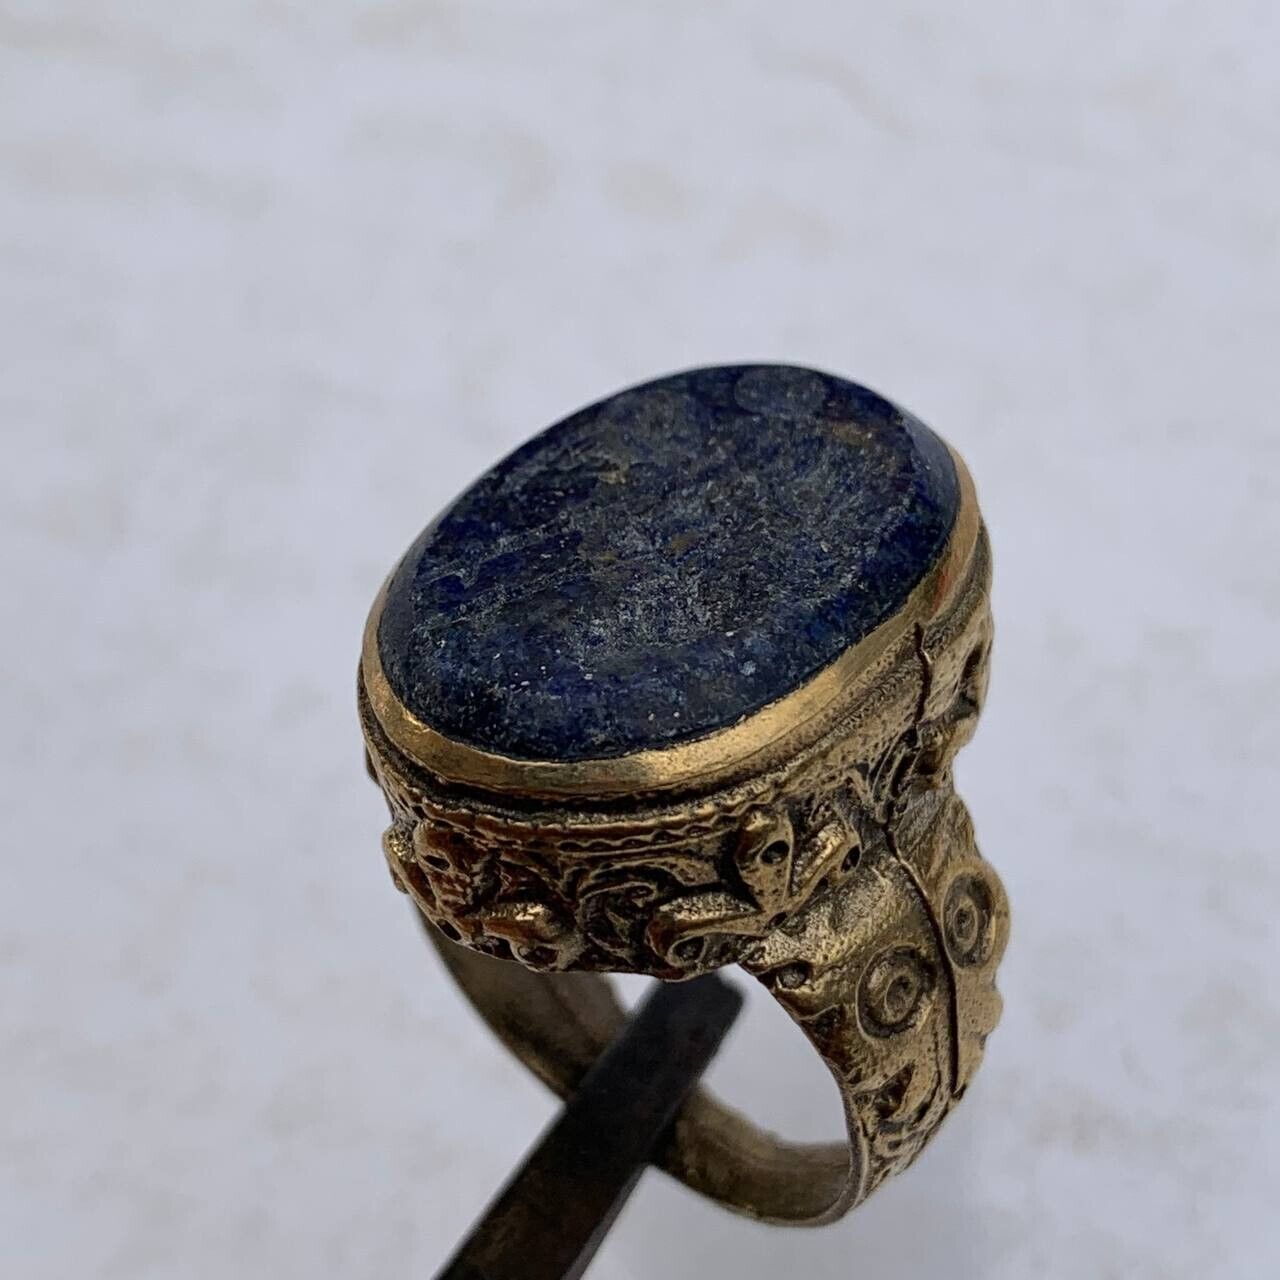 EXTREMELY RARE ANCIENT BRONZE ANTIQUE ISLAMIC OTTOMAN INTAGLIO RING INSCRIPTIONS